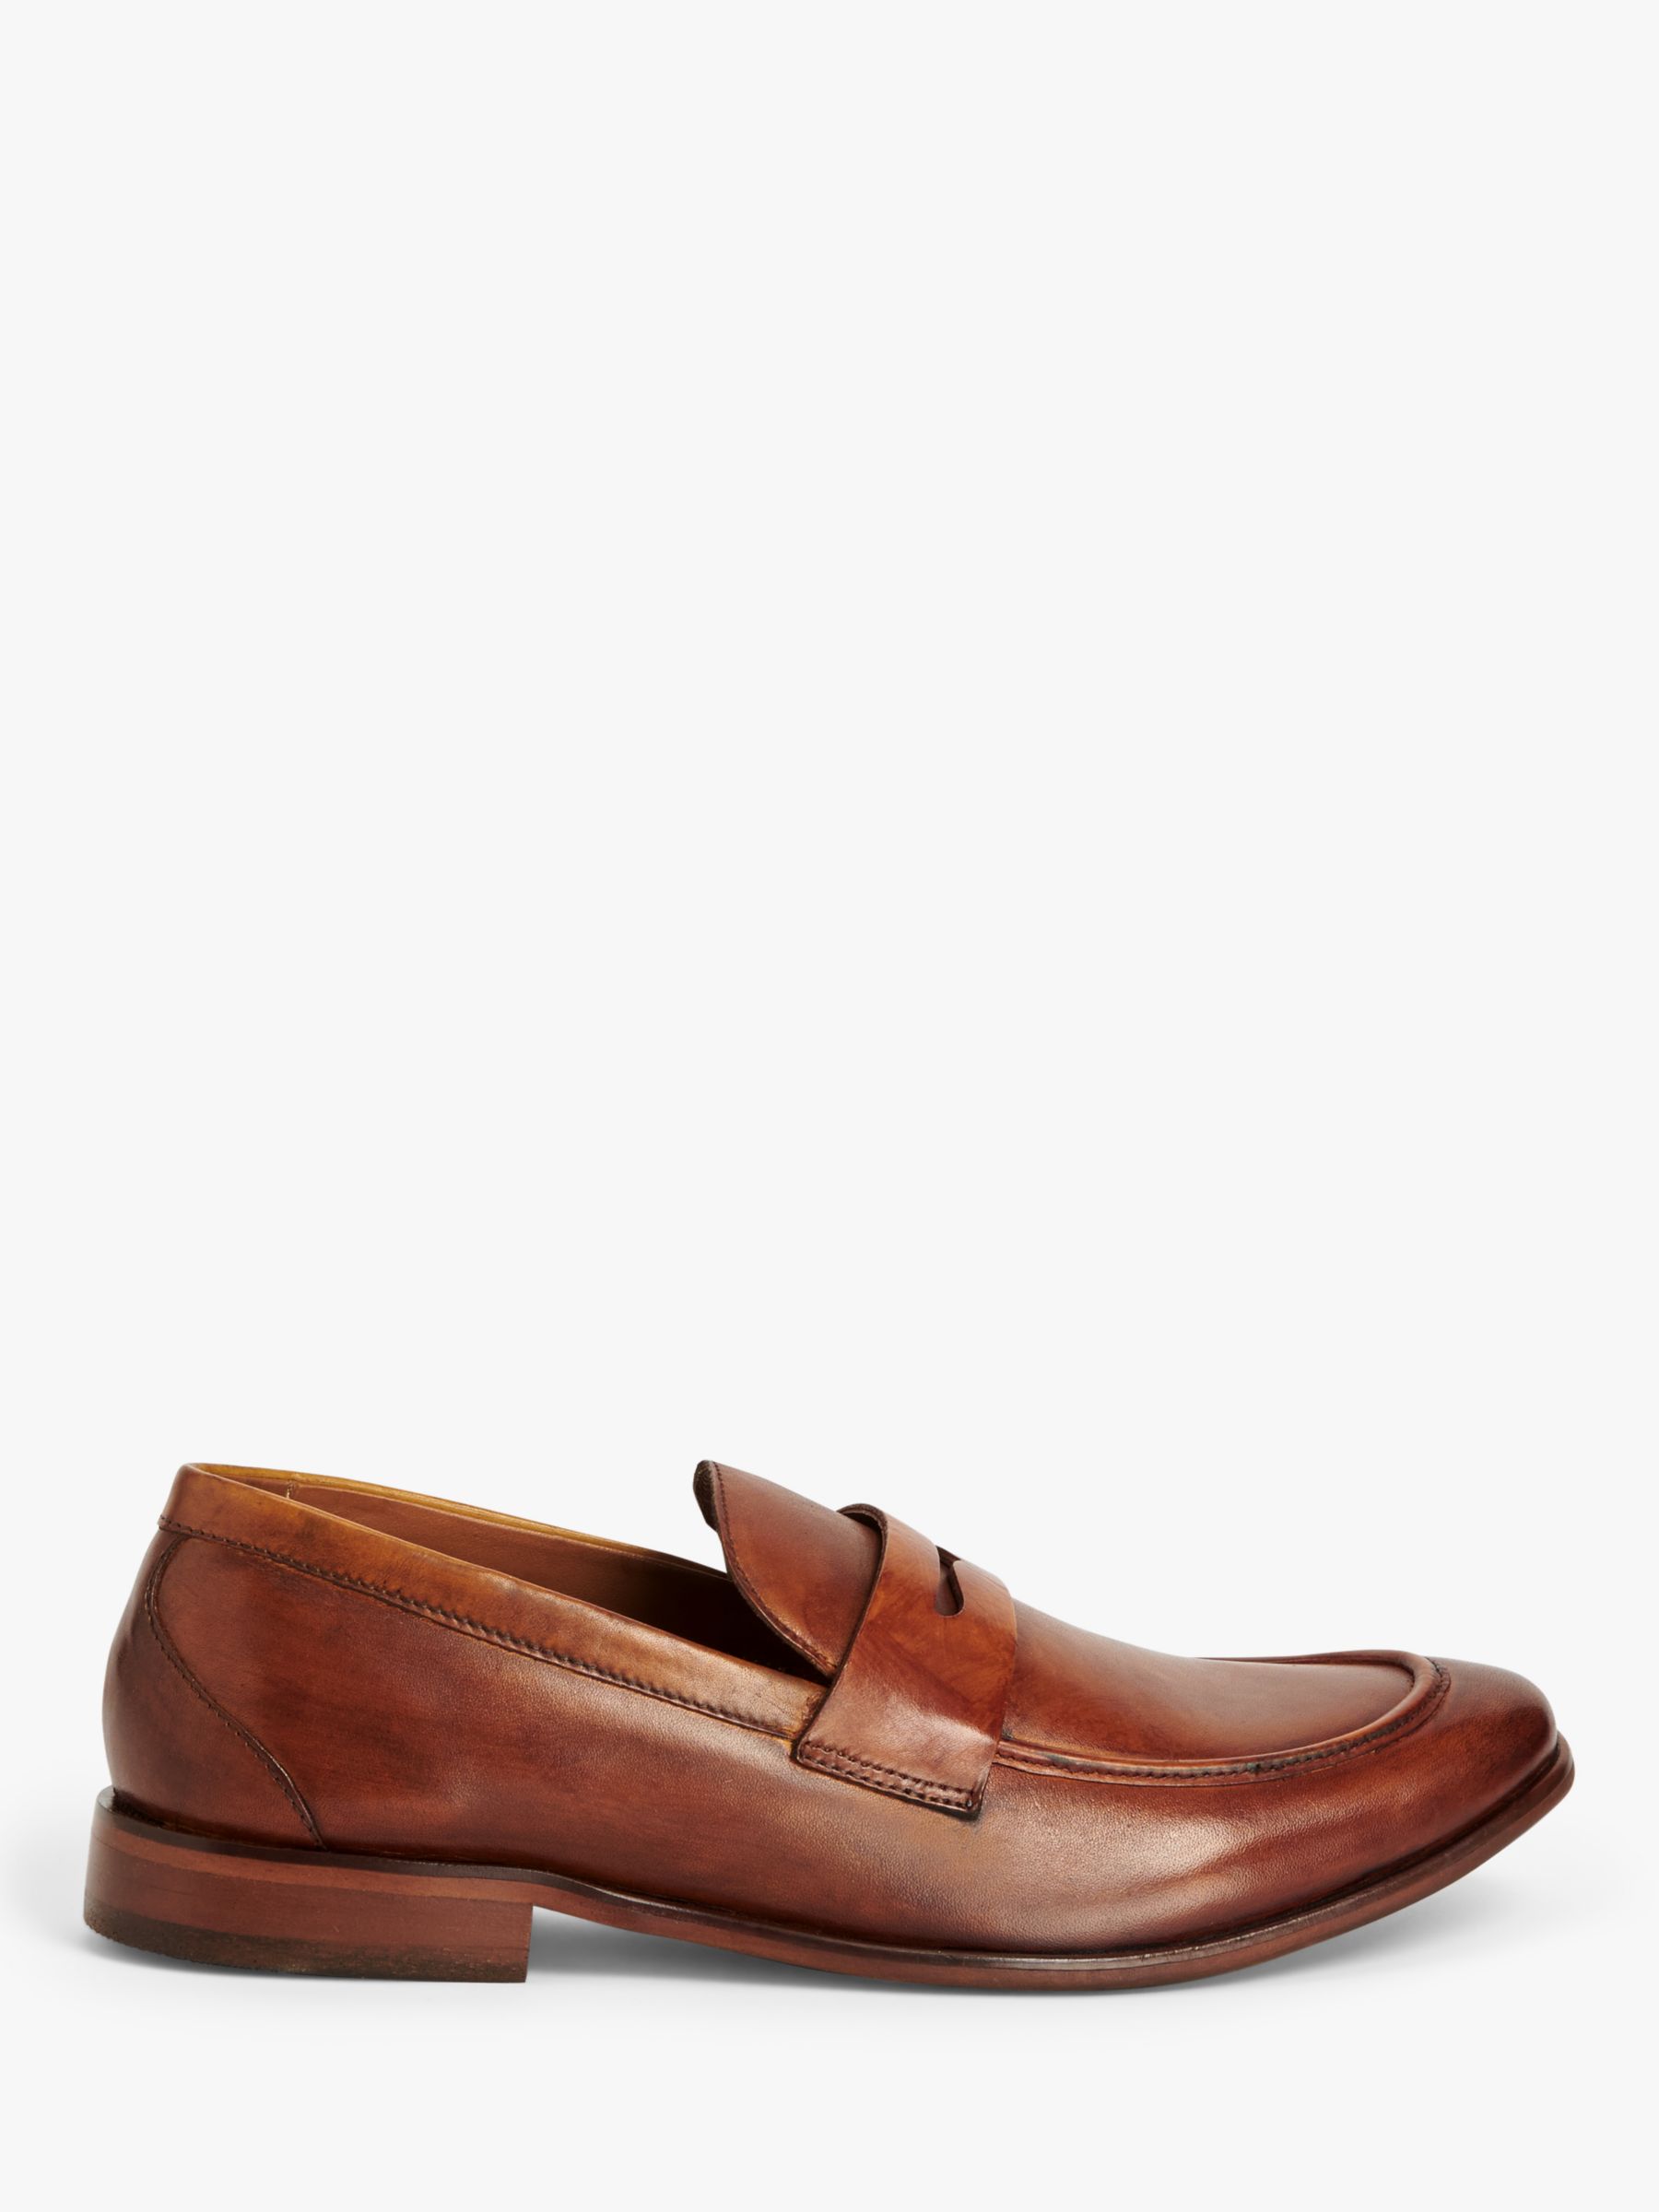 John Lewis Leather Penny Loafers, Tan at John Lewis & Partners